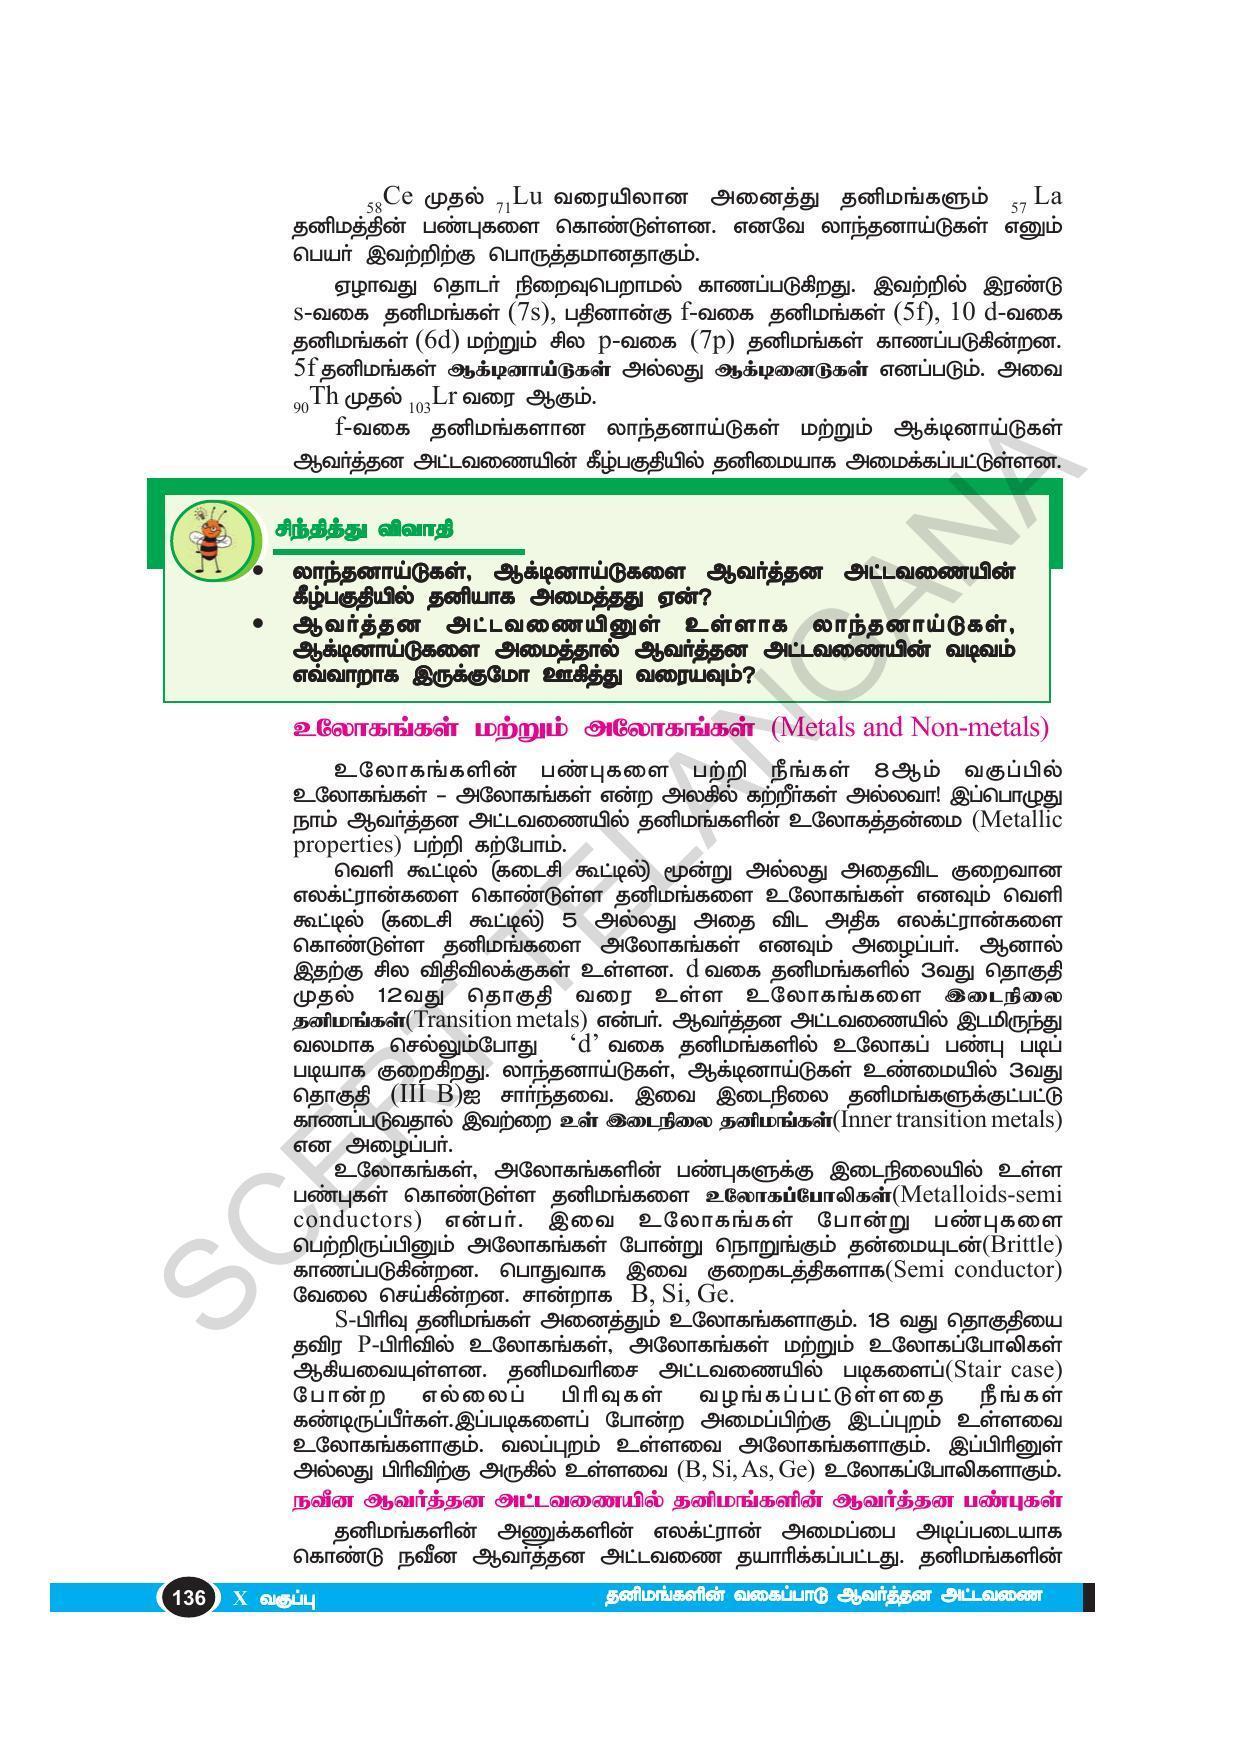 TS SCERT Class 10 Physical Science(Tamil Medium) Text Book - Page 148